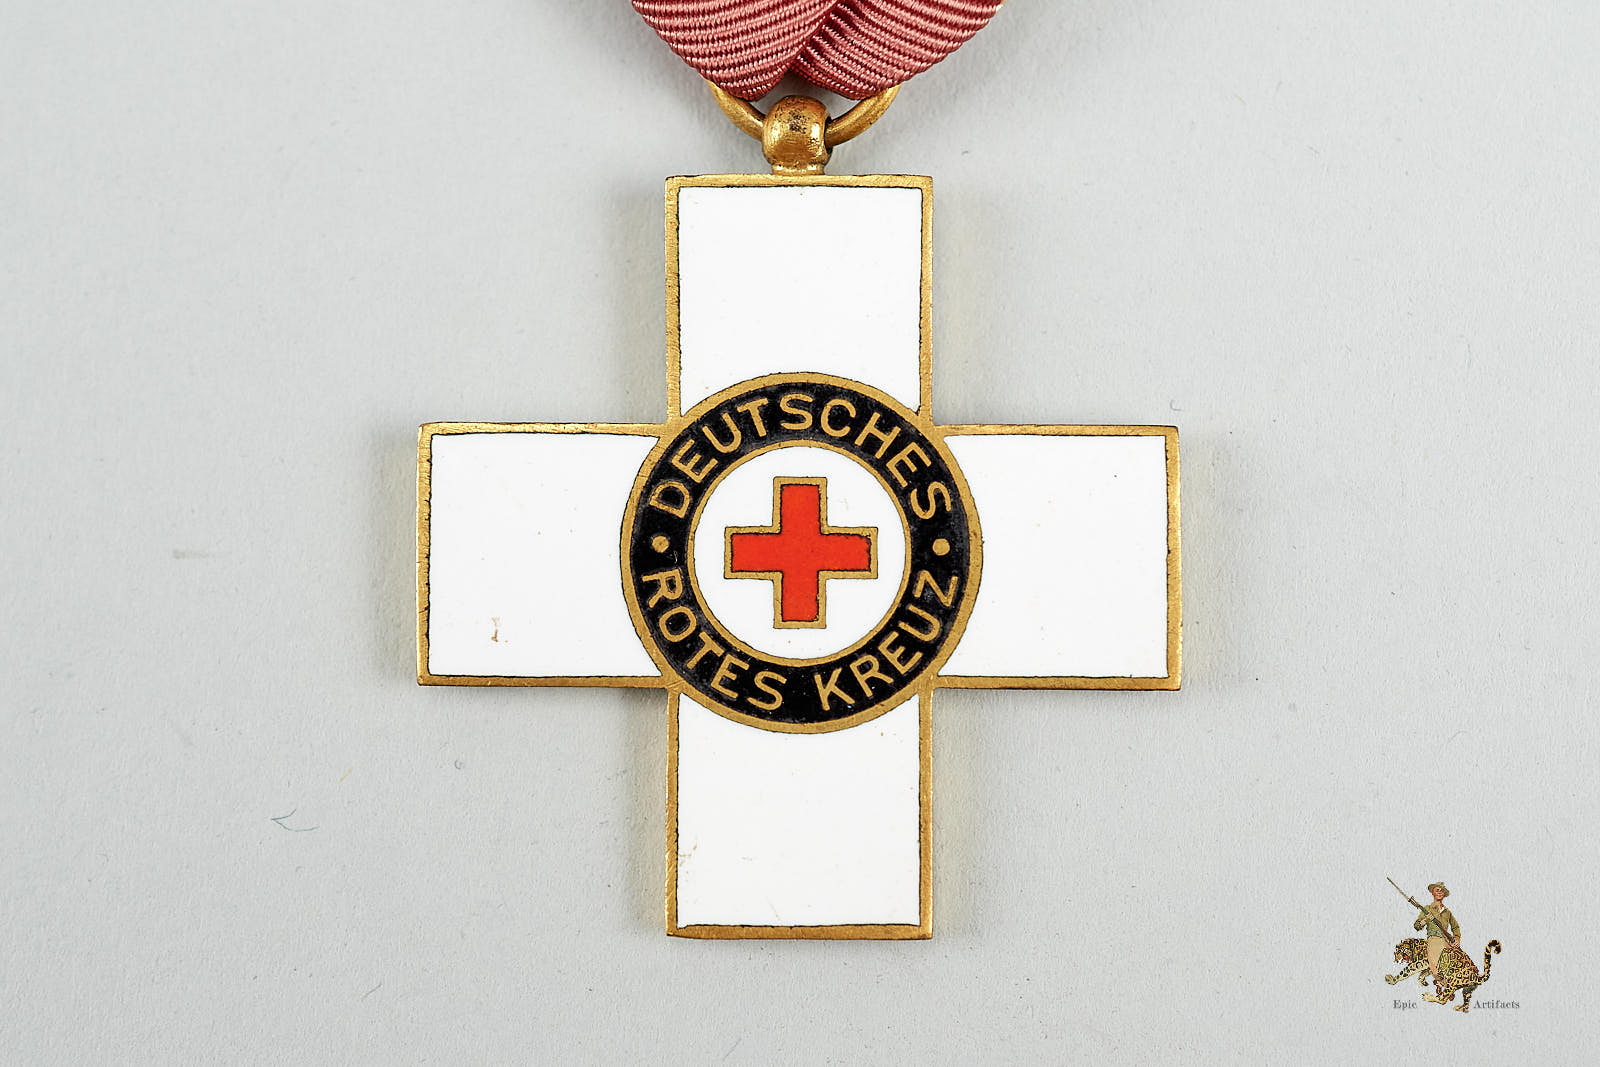 1922 2nd Class Red Cross Medal - Epic Artifacts German World Wars